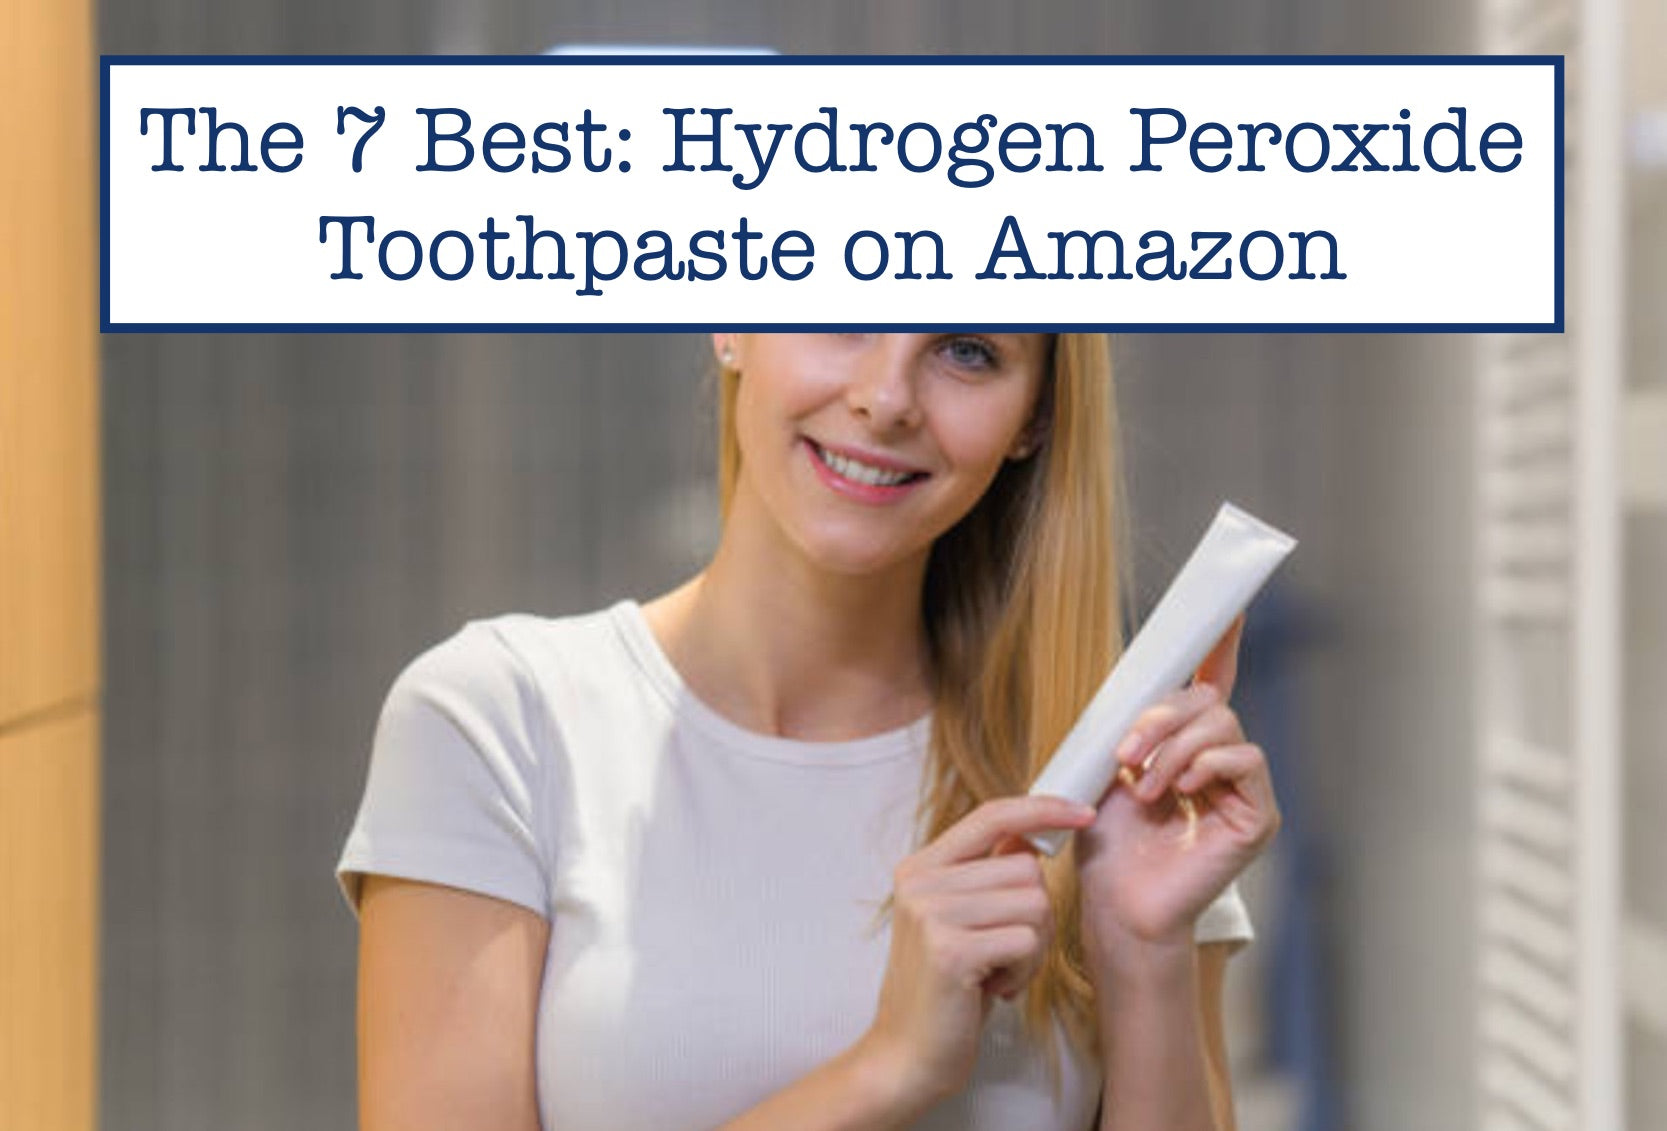 The 7 Best: Hydrogen Peroxide Toothpaste on Amazon